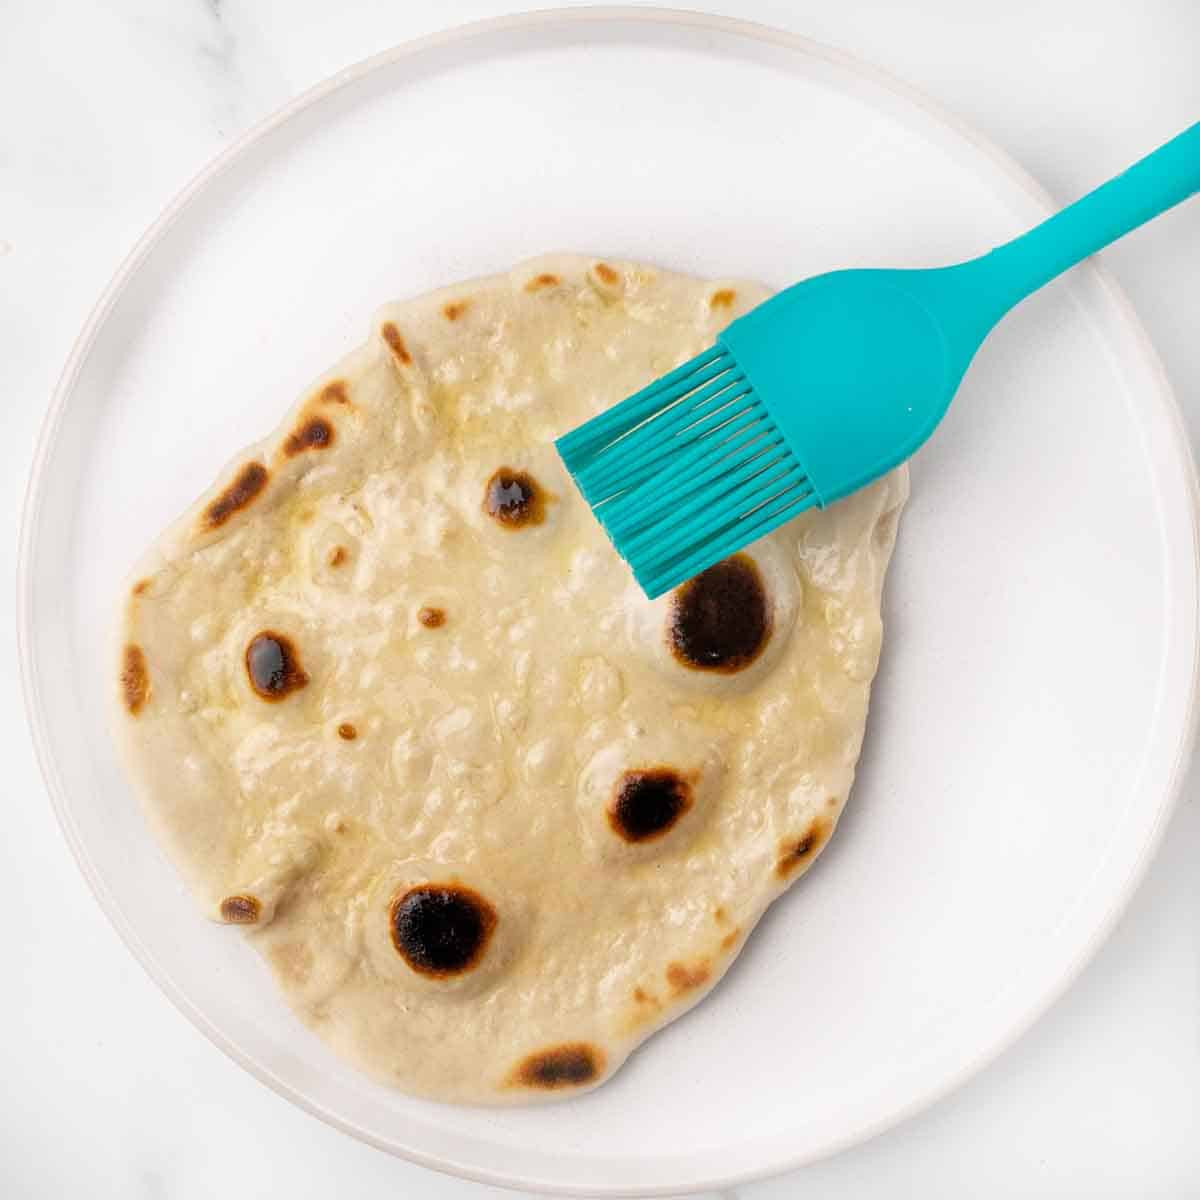 buttering naan bread with blue silicone brush.